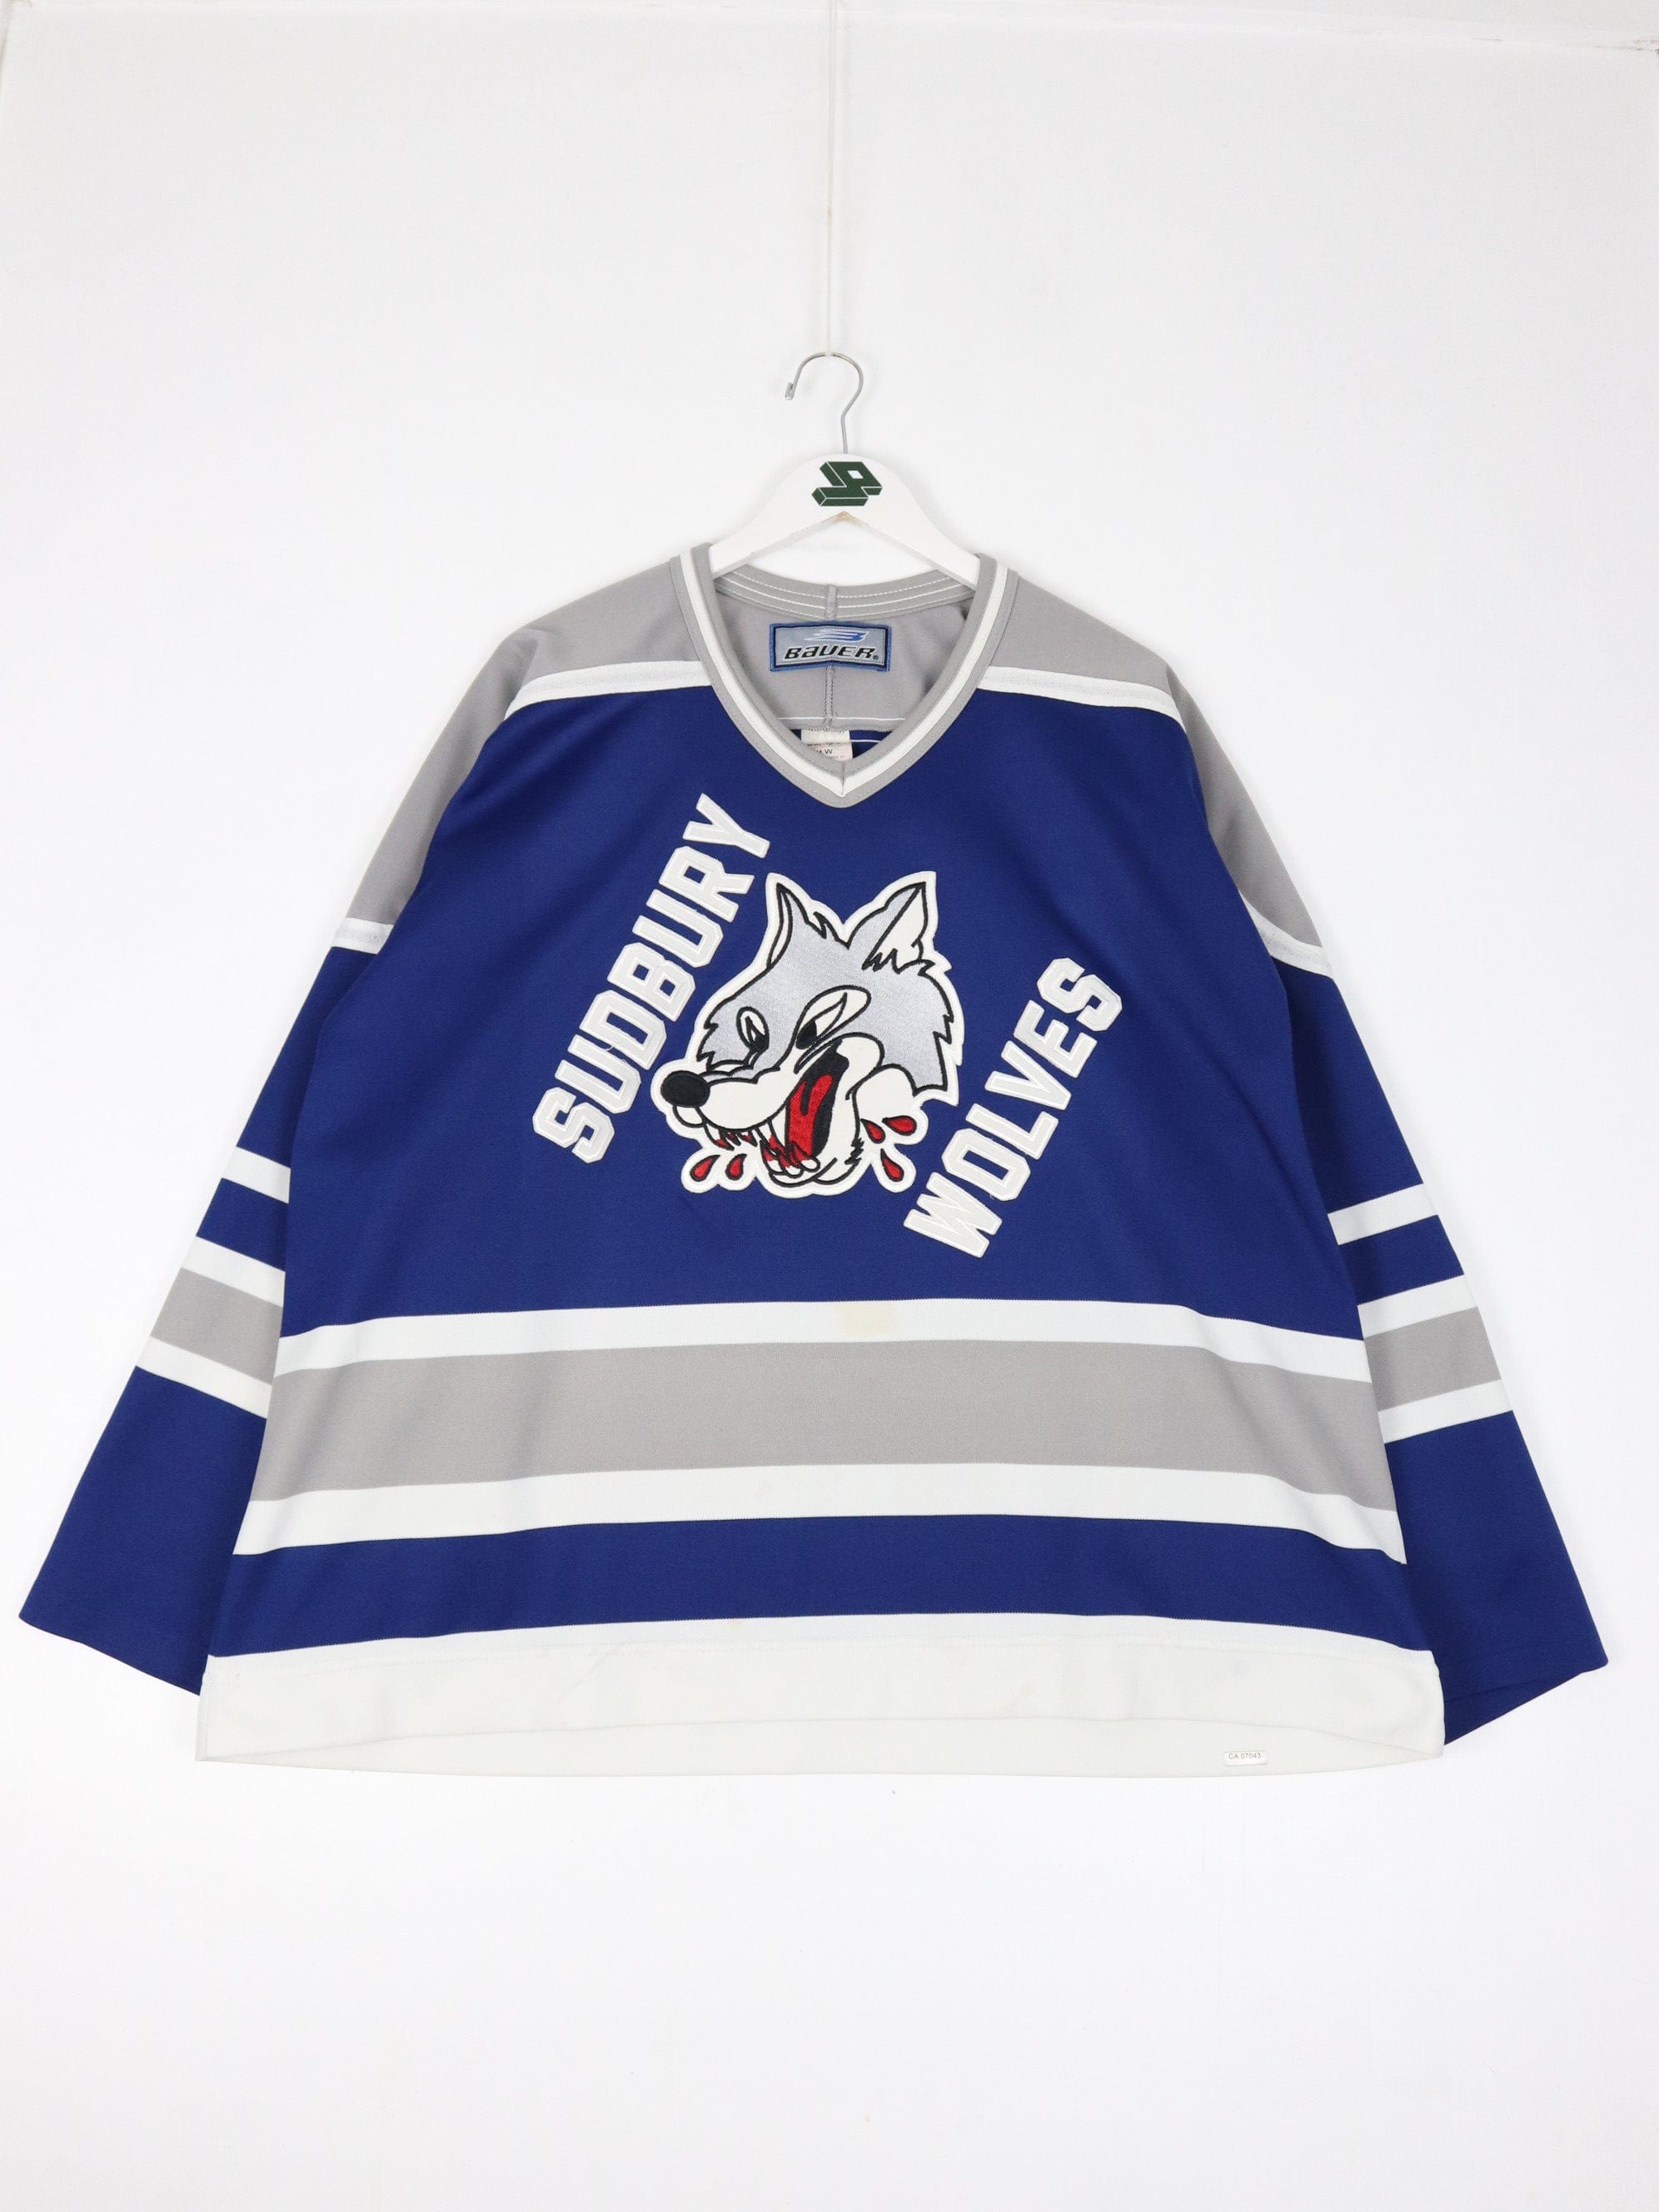 OHL RBK white practice jersey